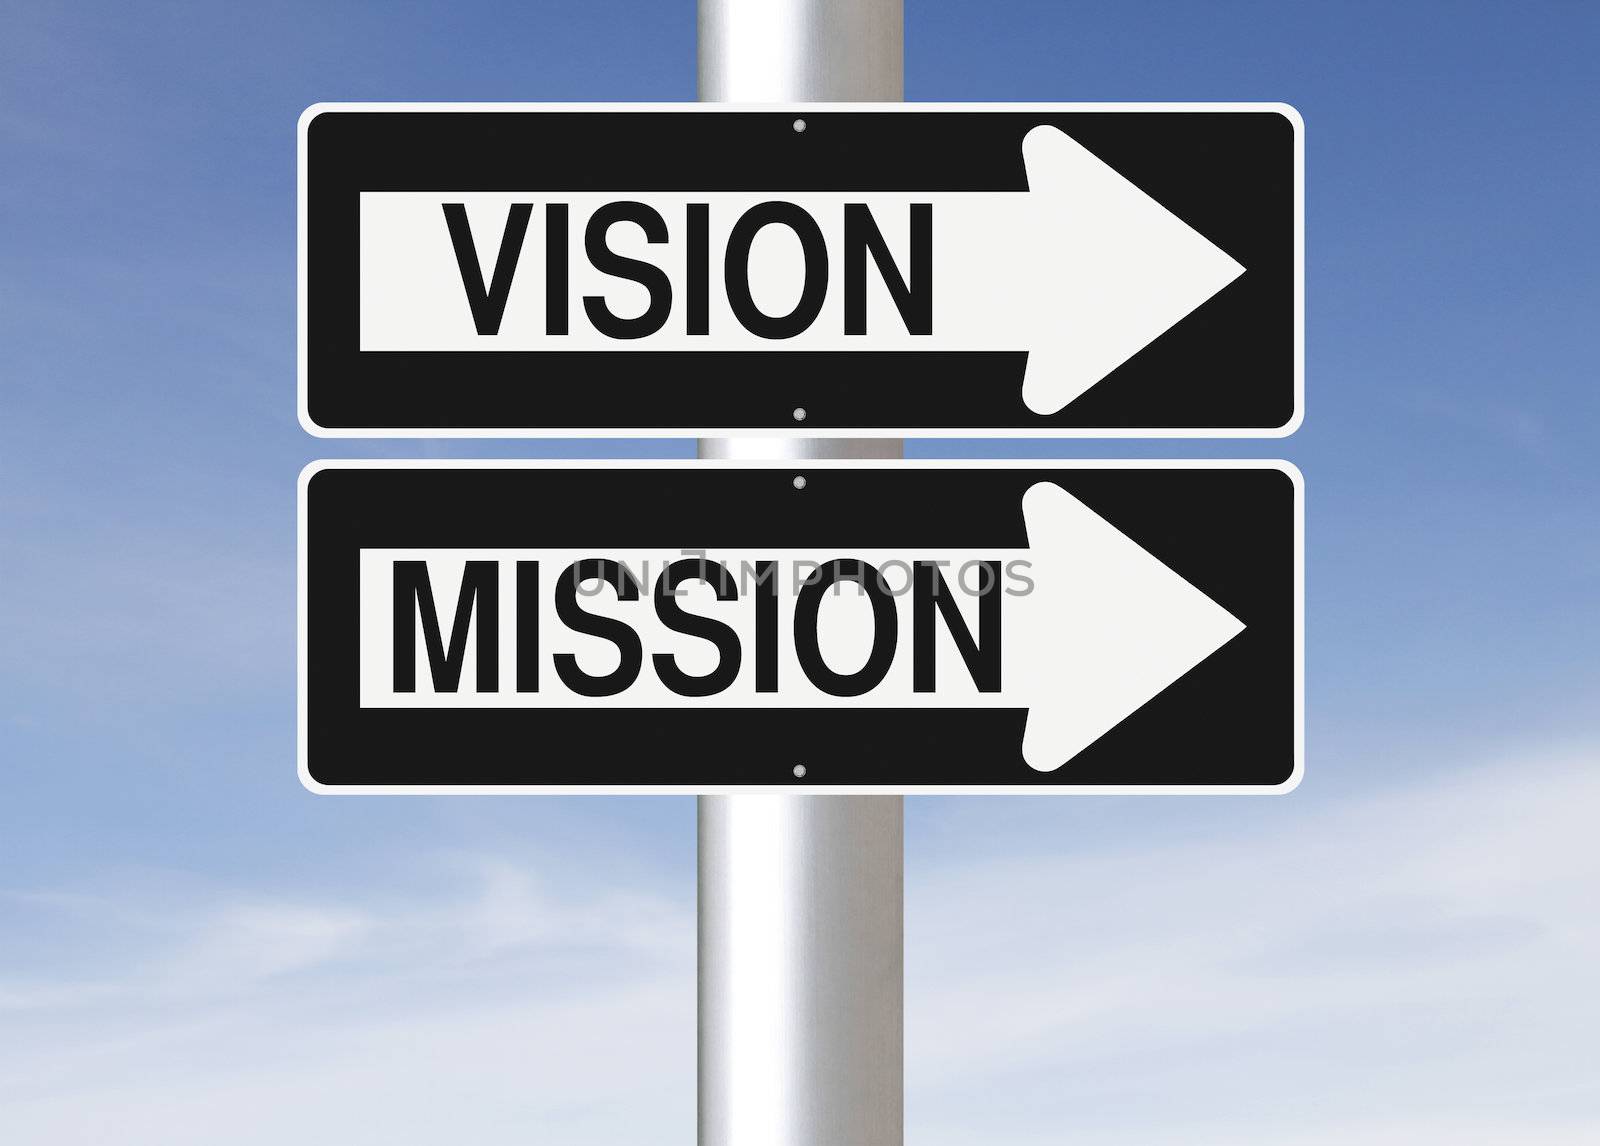 Conceptual one way street signs on a pole indicating Vision and Mission